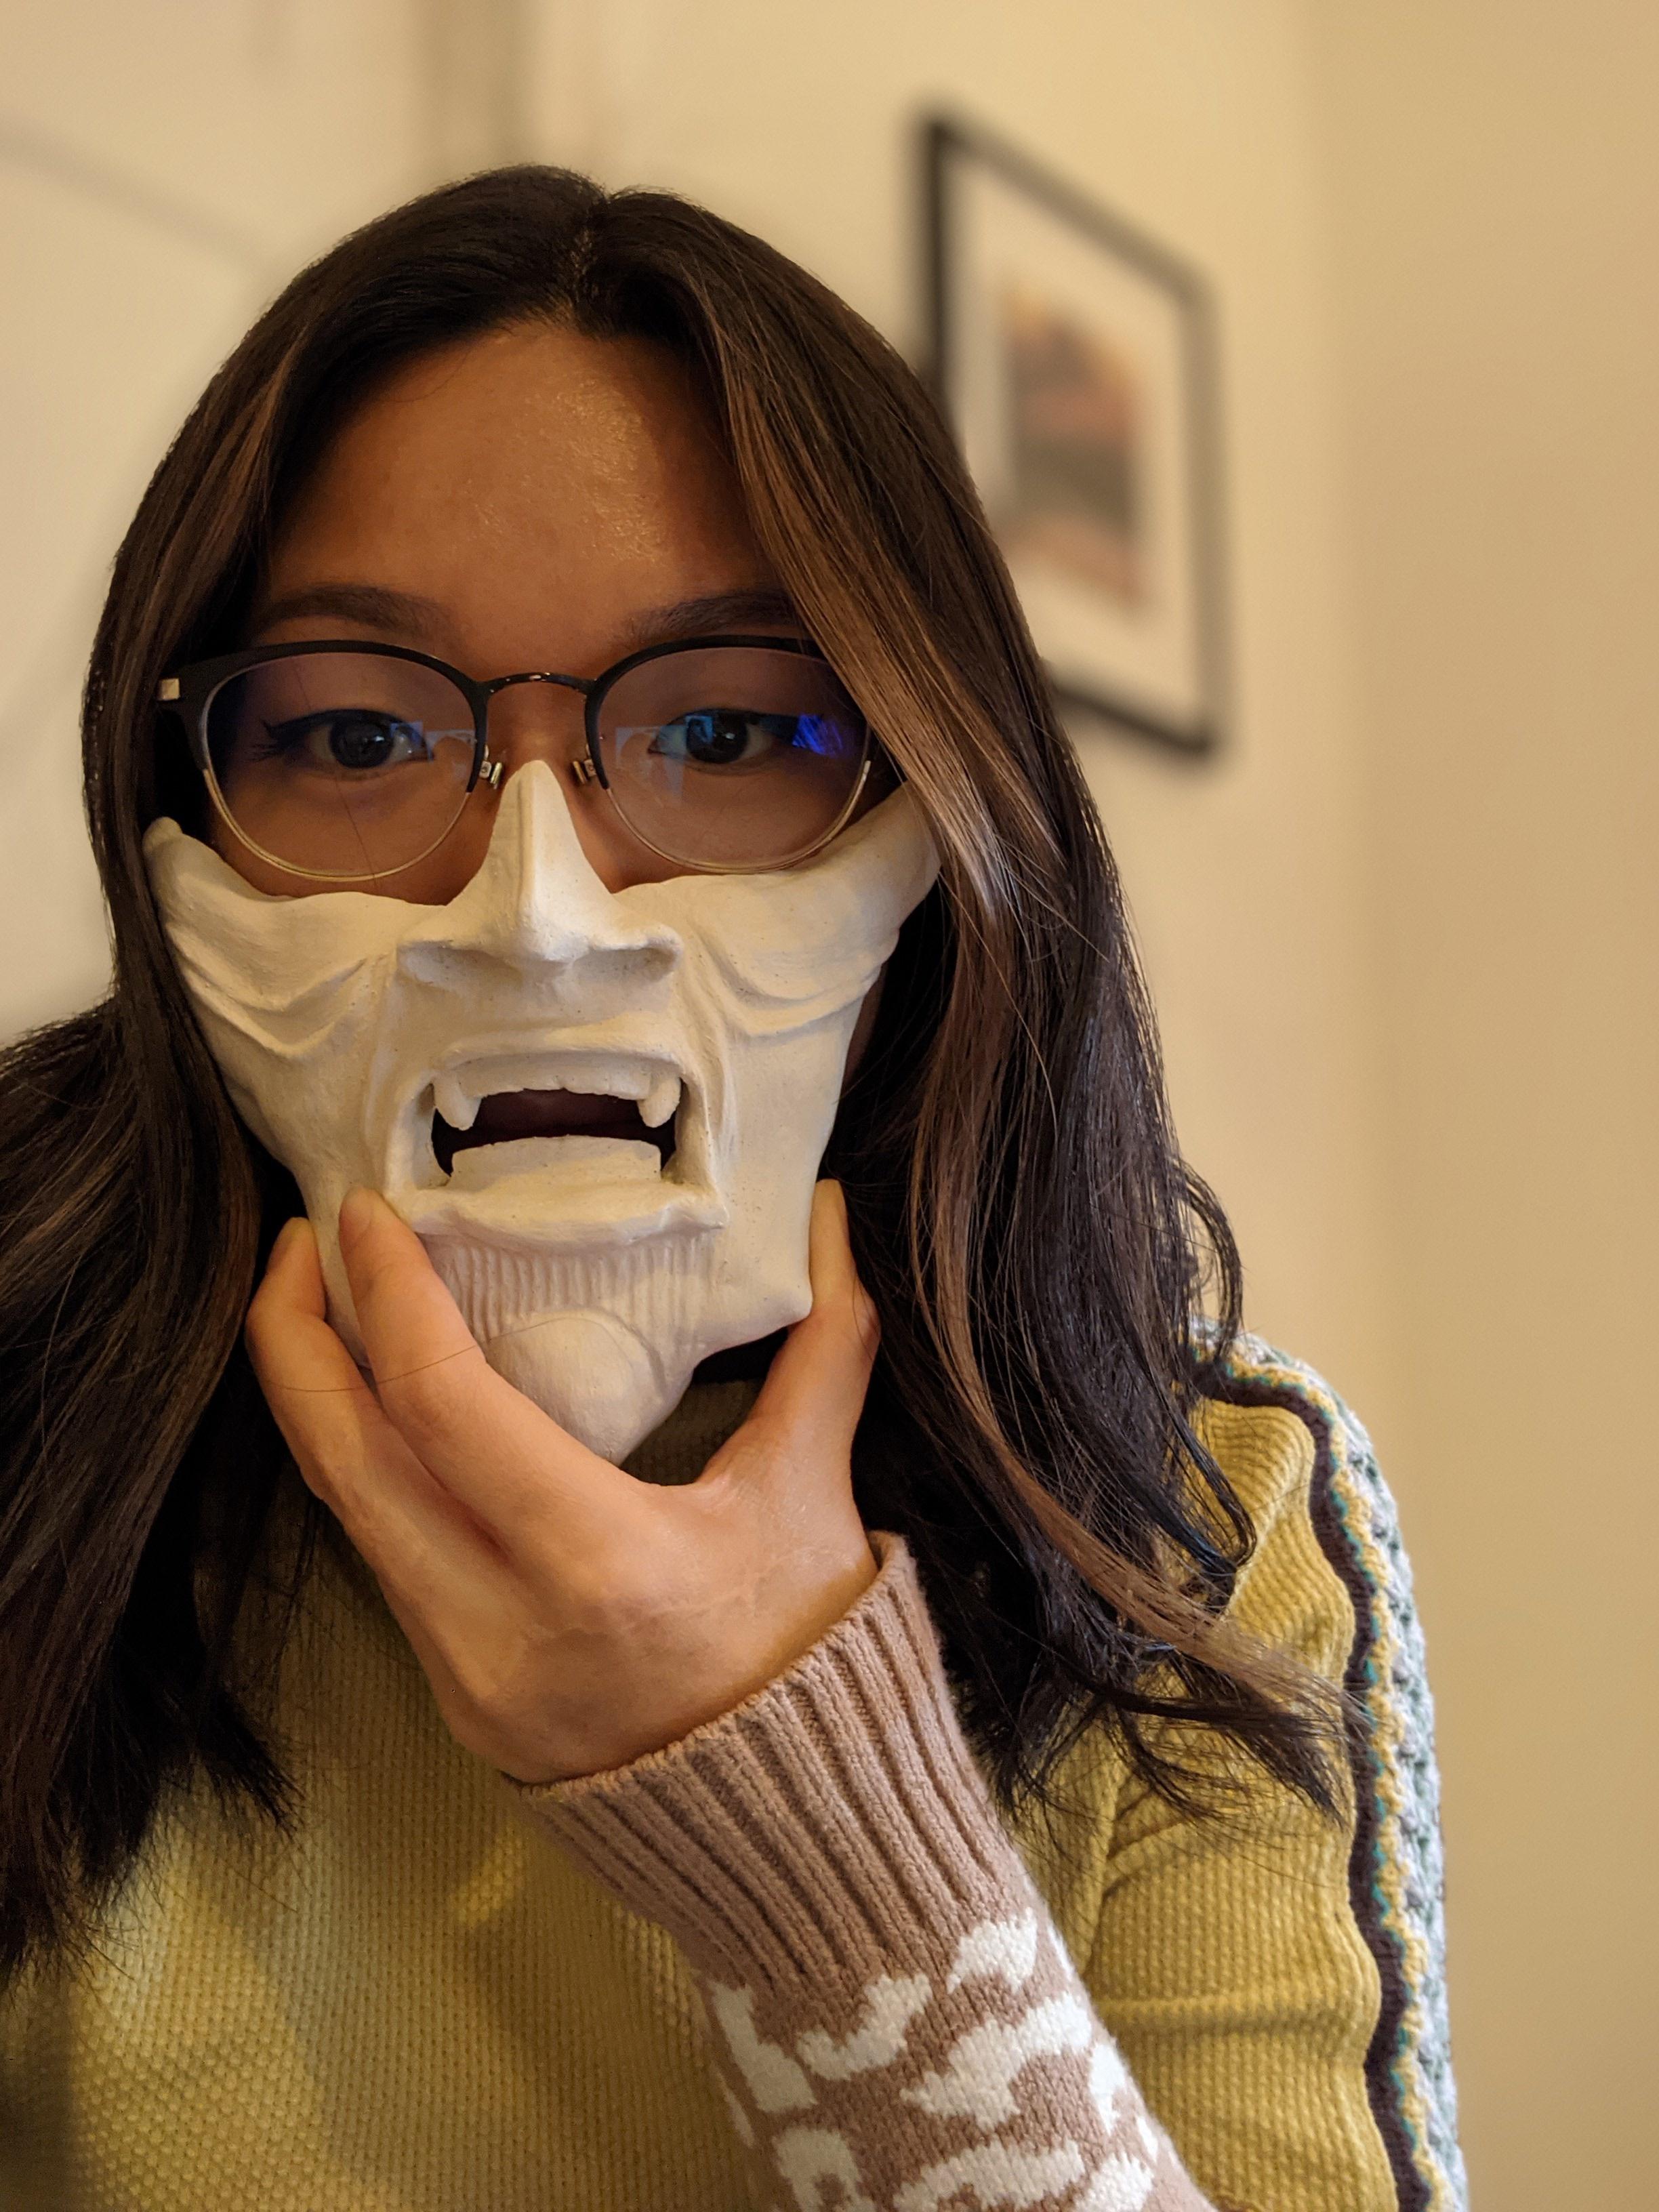 cool pics - woman holding porcelain facemask